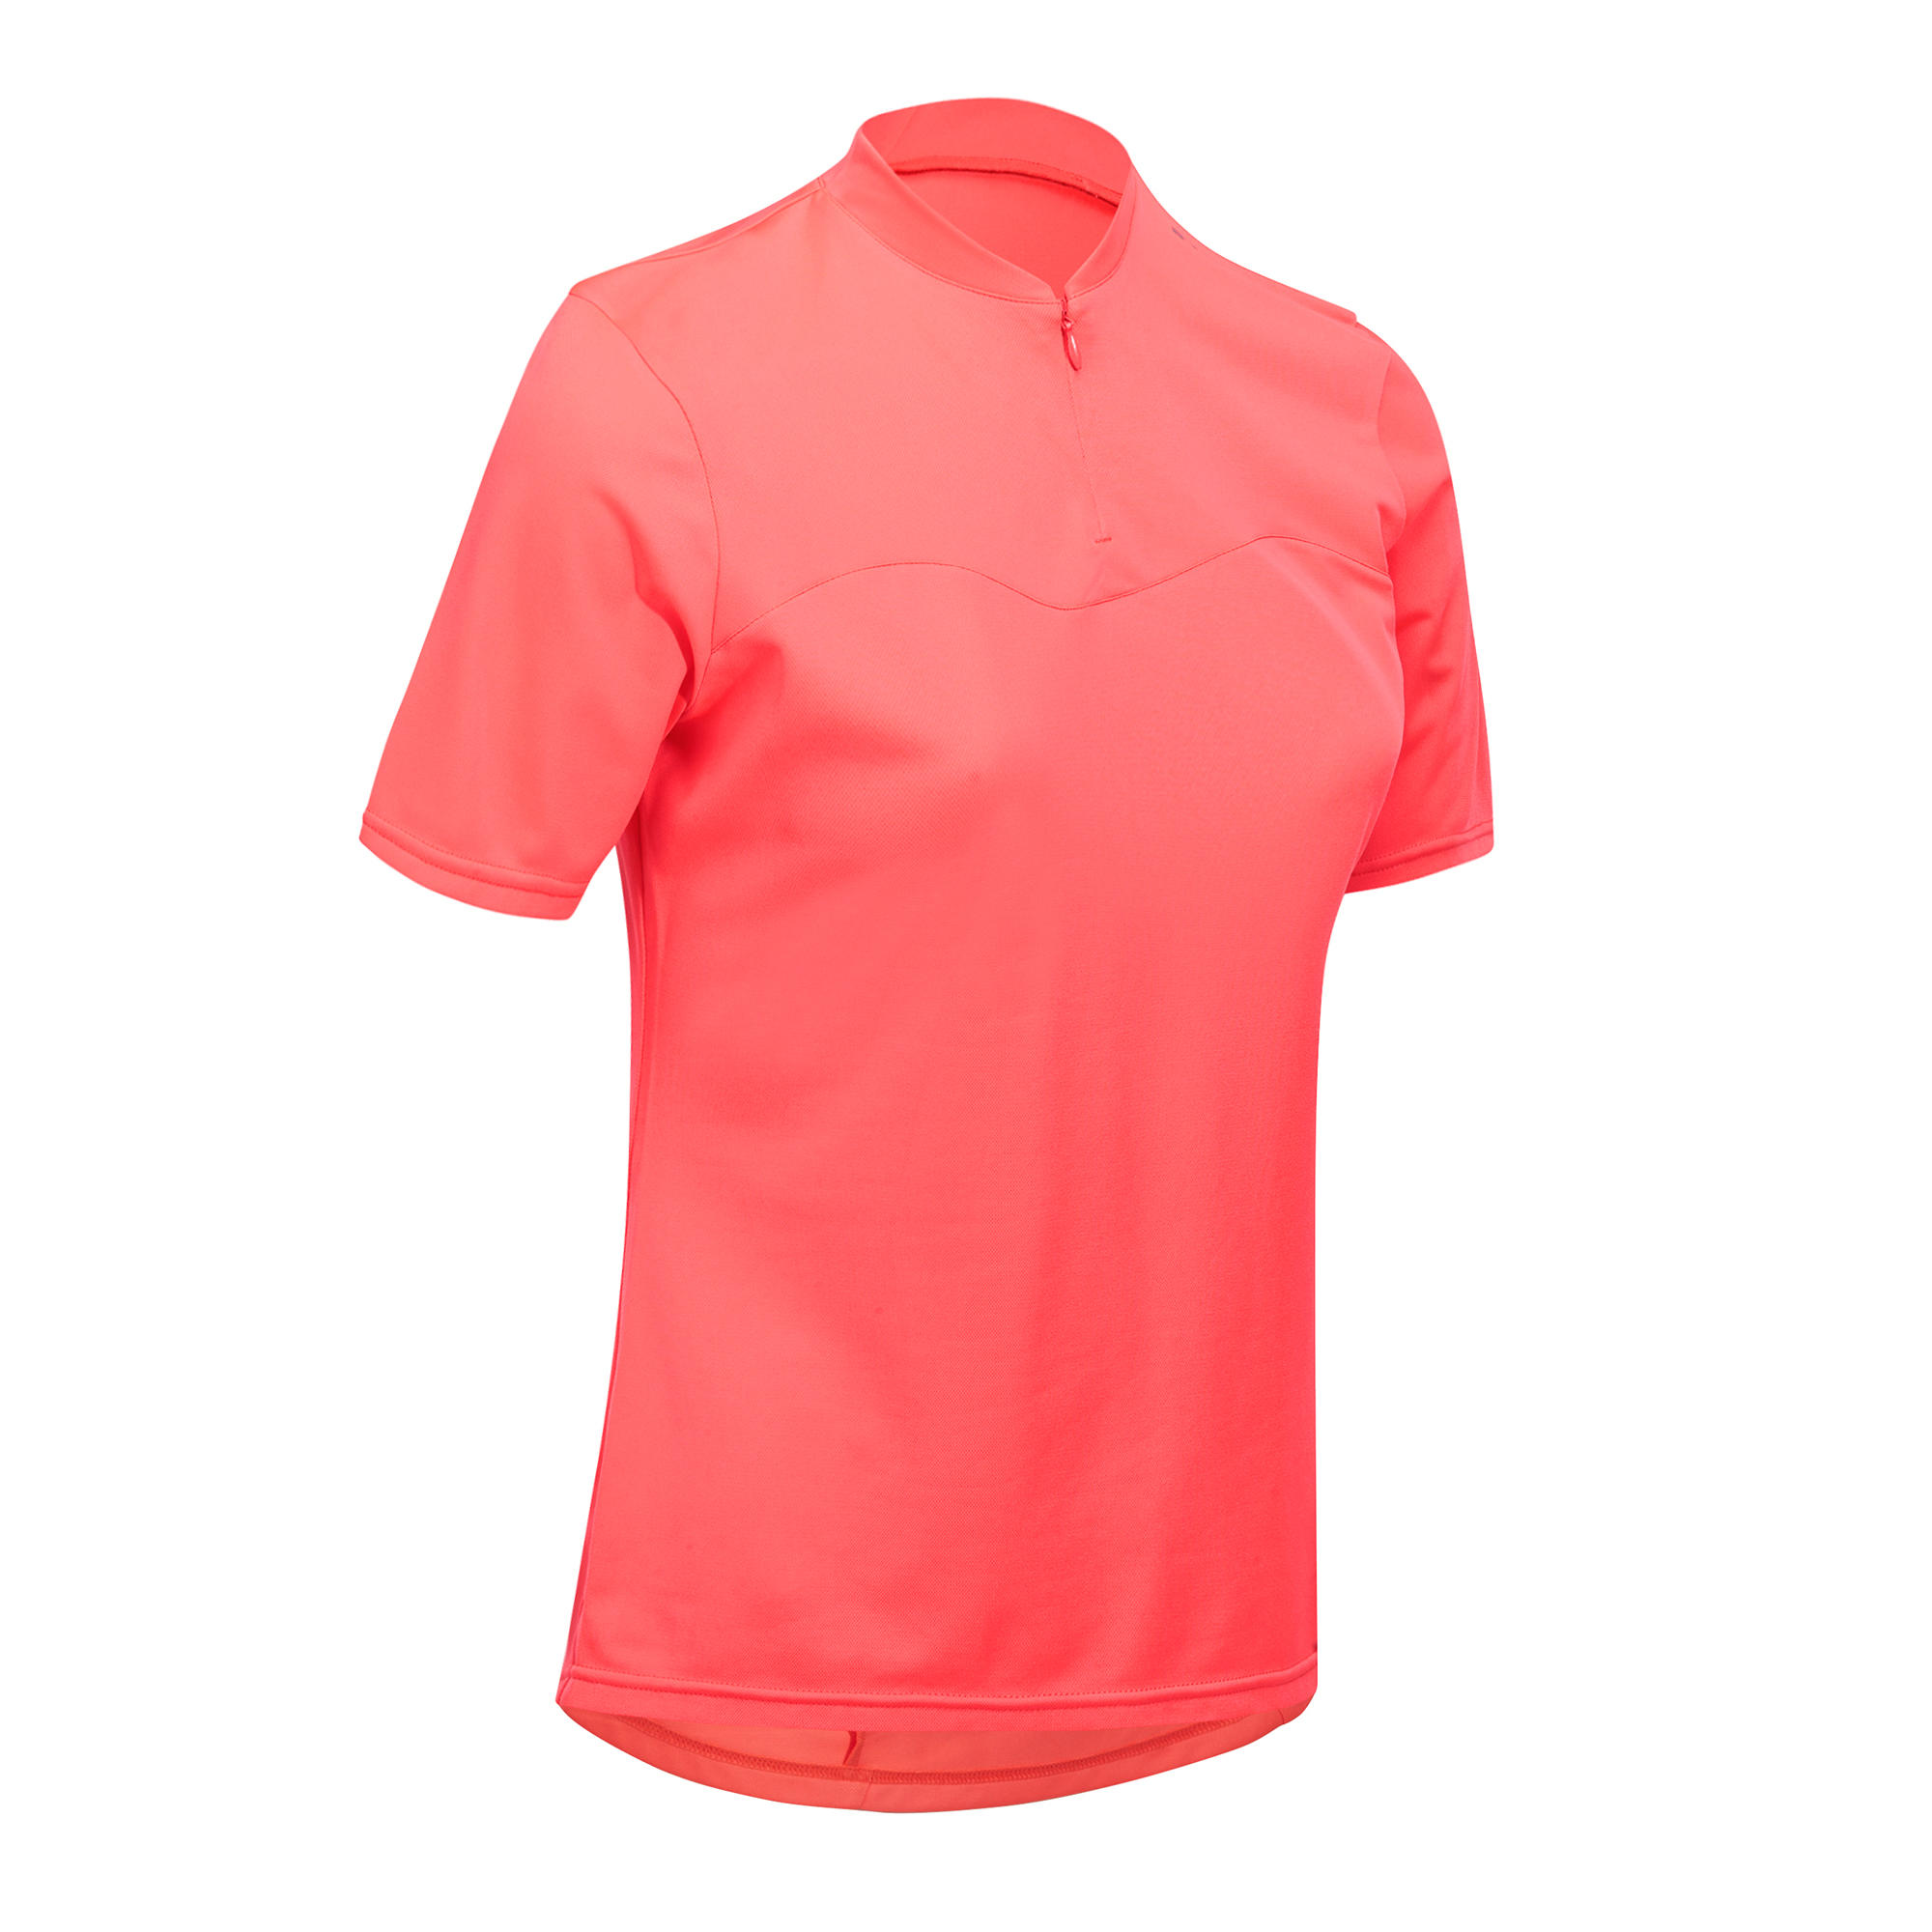 100 Women's Short-Sleeved Cycling Jersey - Pink 1/20